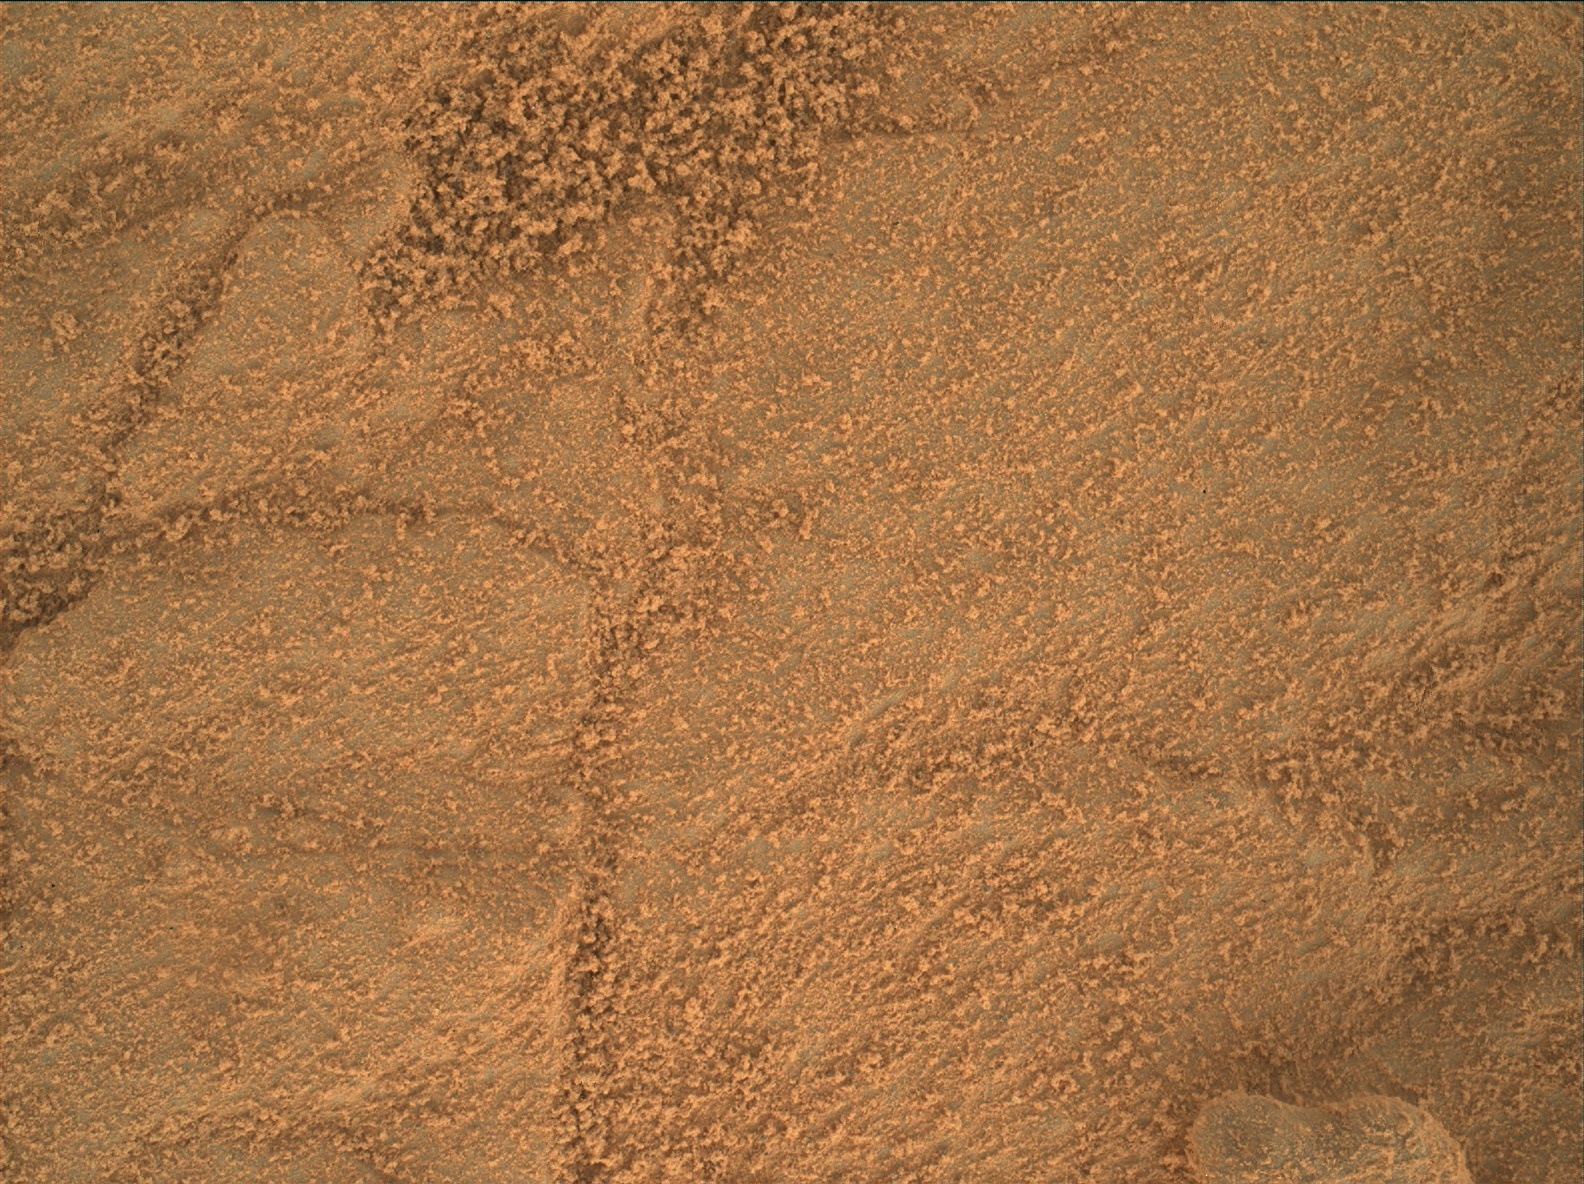 Nasa's Mars rover Curiosity acquired this image using its Mars Hand Lens Imager (MAHLI) on Sol 156